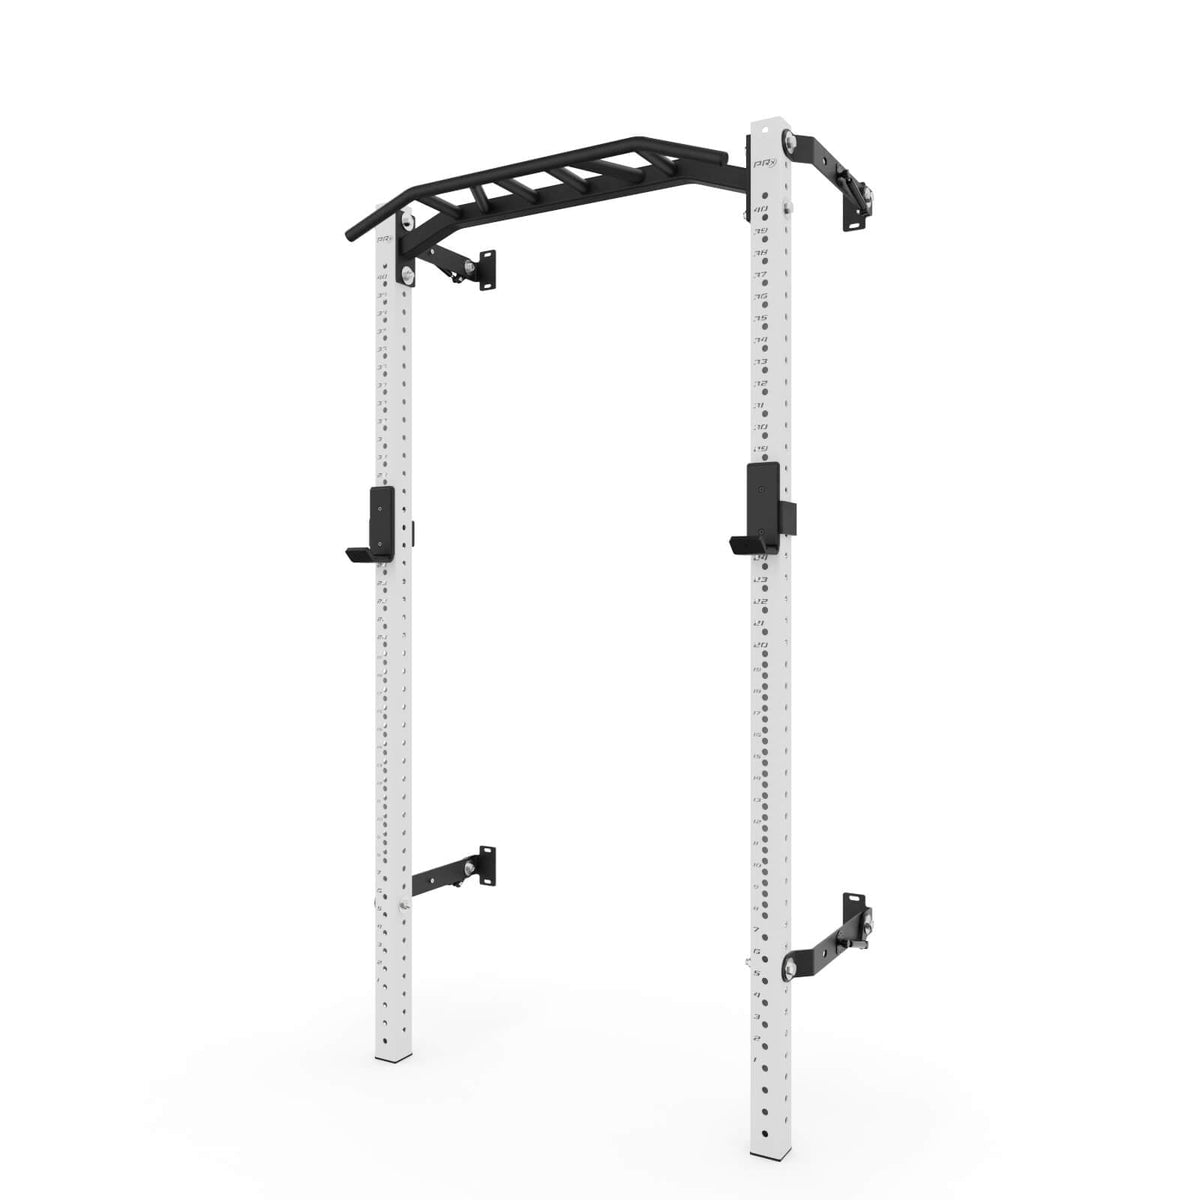 Multi-Grip Pull-Up Bar | REP Fitness | Rack Attachments